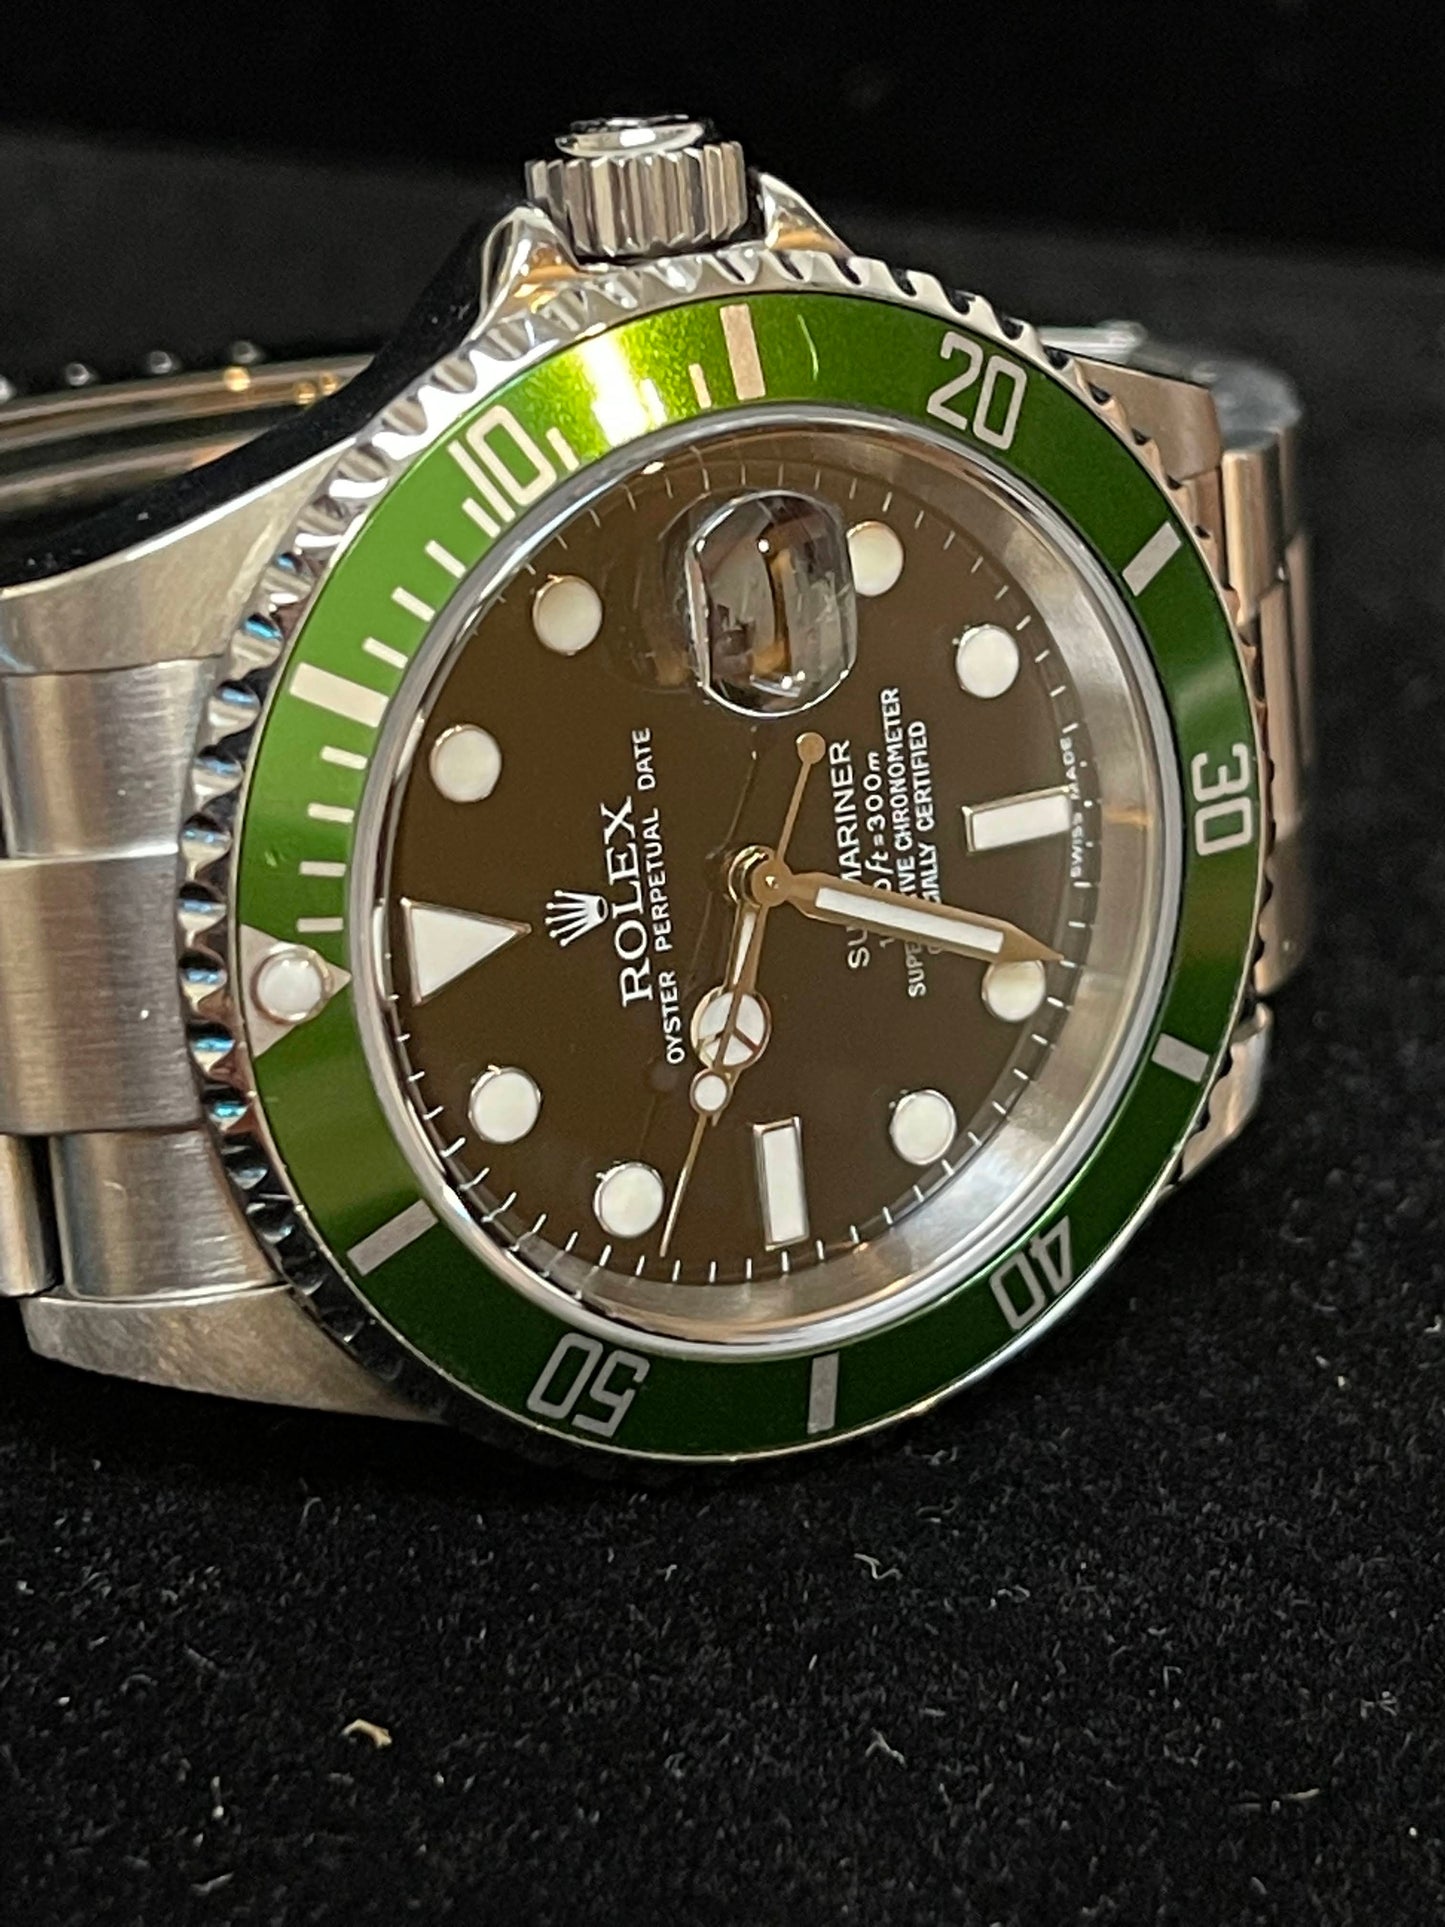 2006 Rolex Submariner Kermit Black Dial Green Bezel 16610LV With Papers 40mm